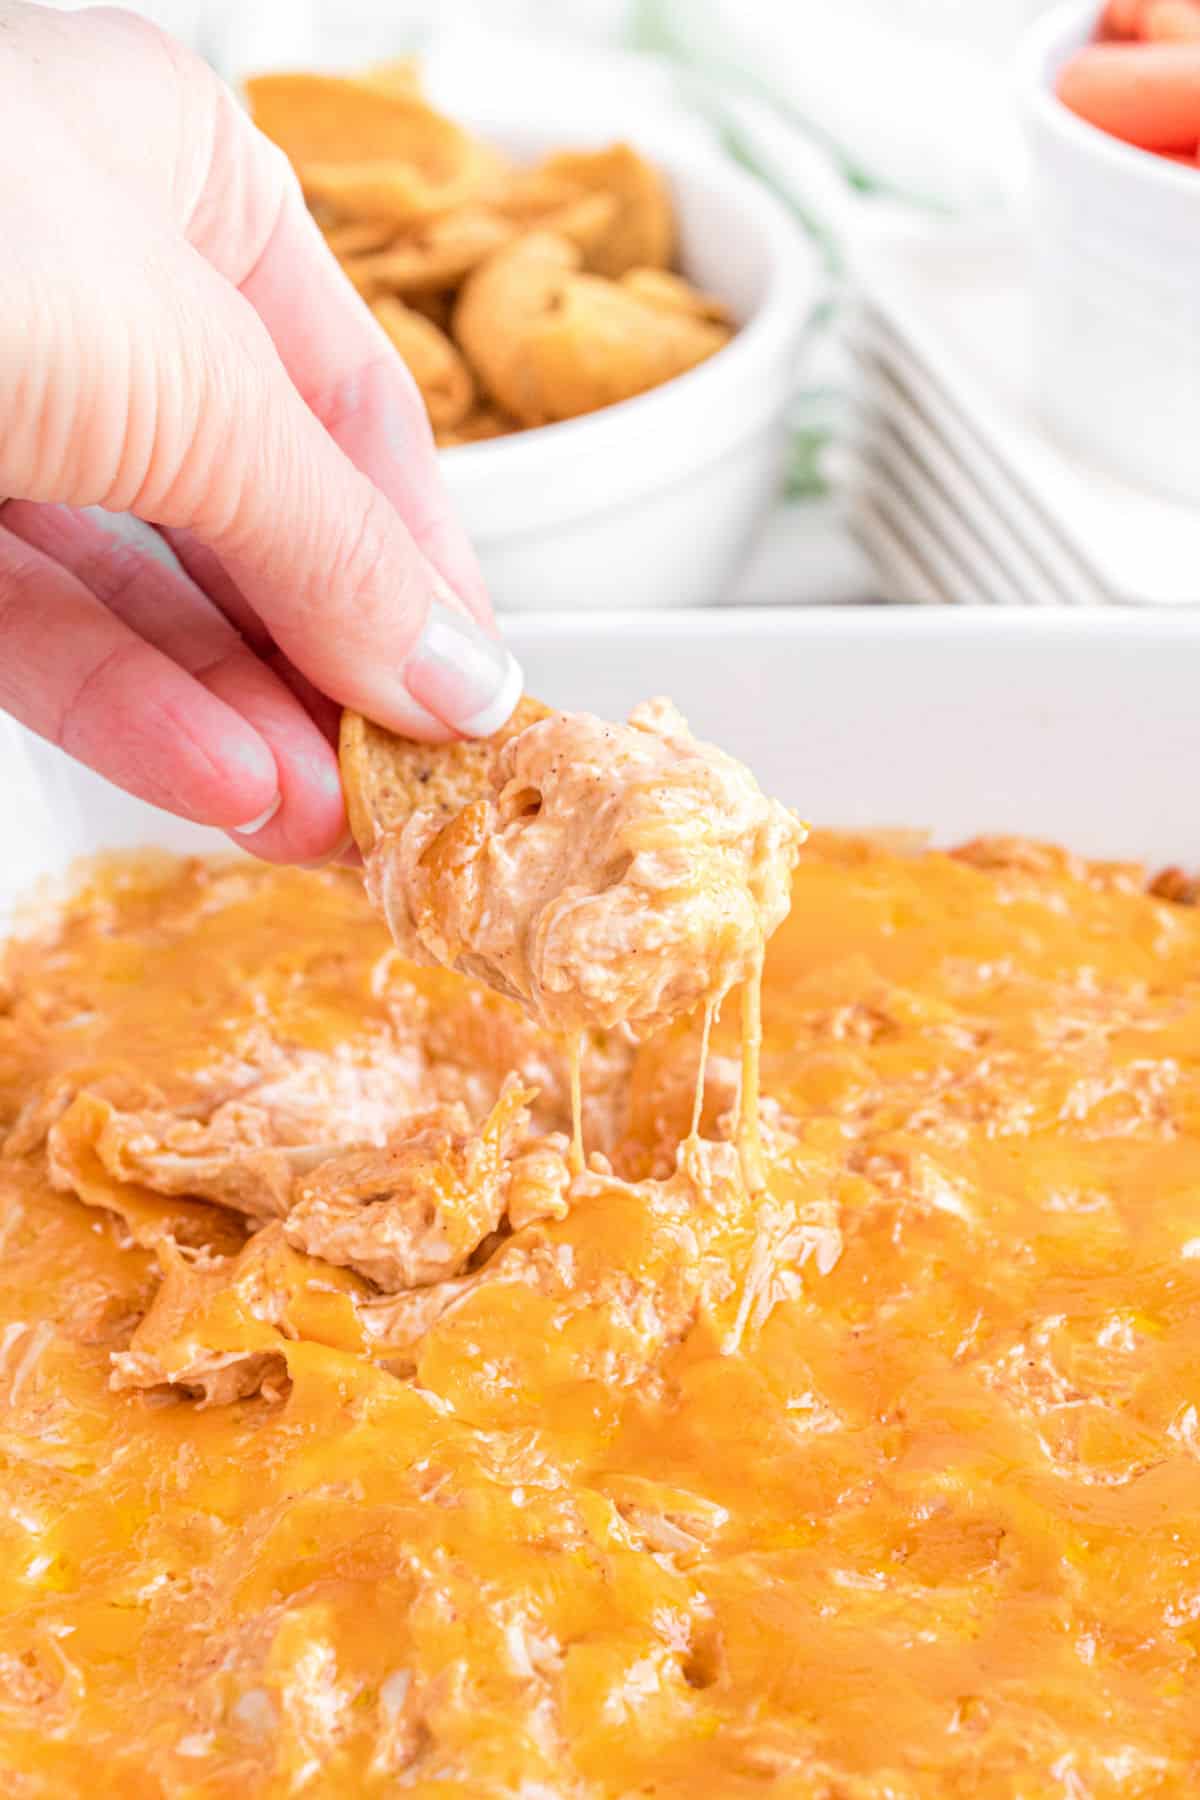 Buffalo chicken dip being scooped with a frito corn chip.